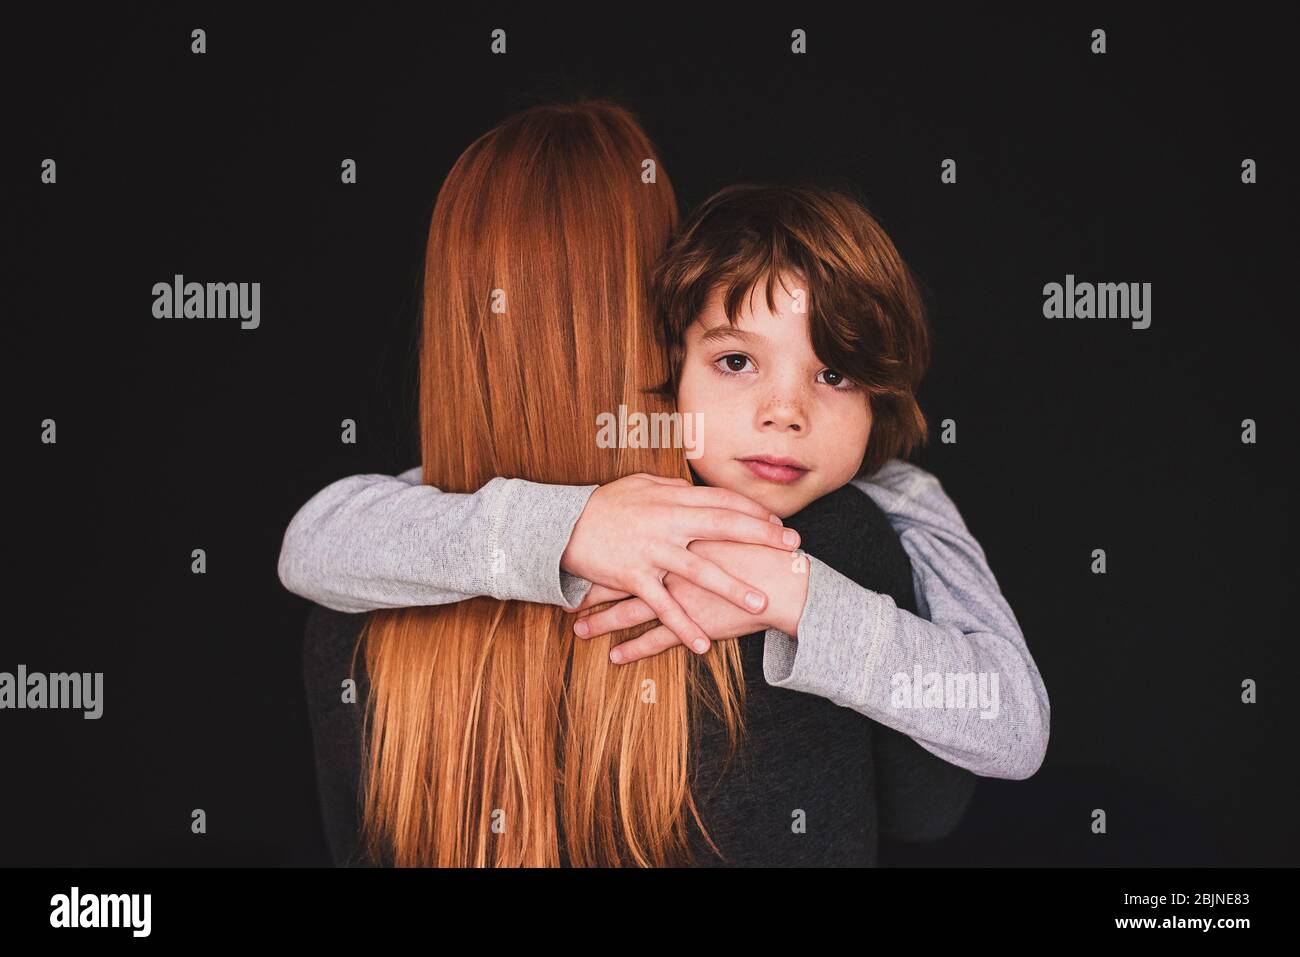 Rear view of a woman hugging her son Stock Photo